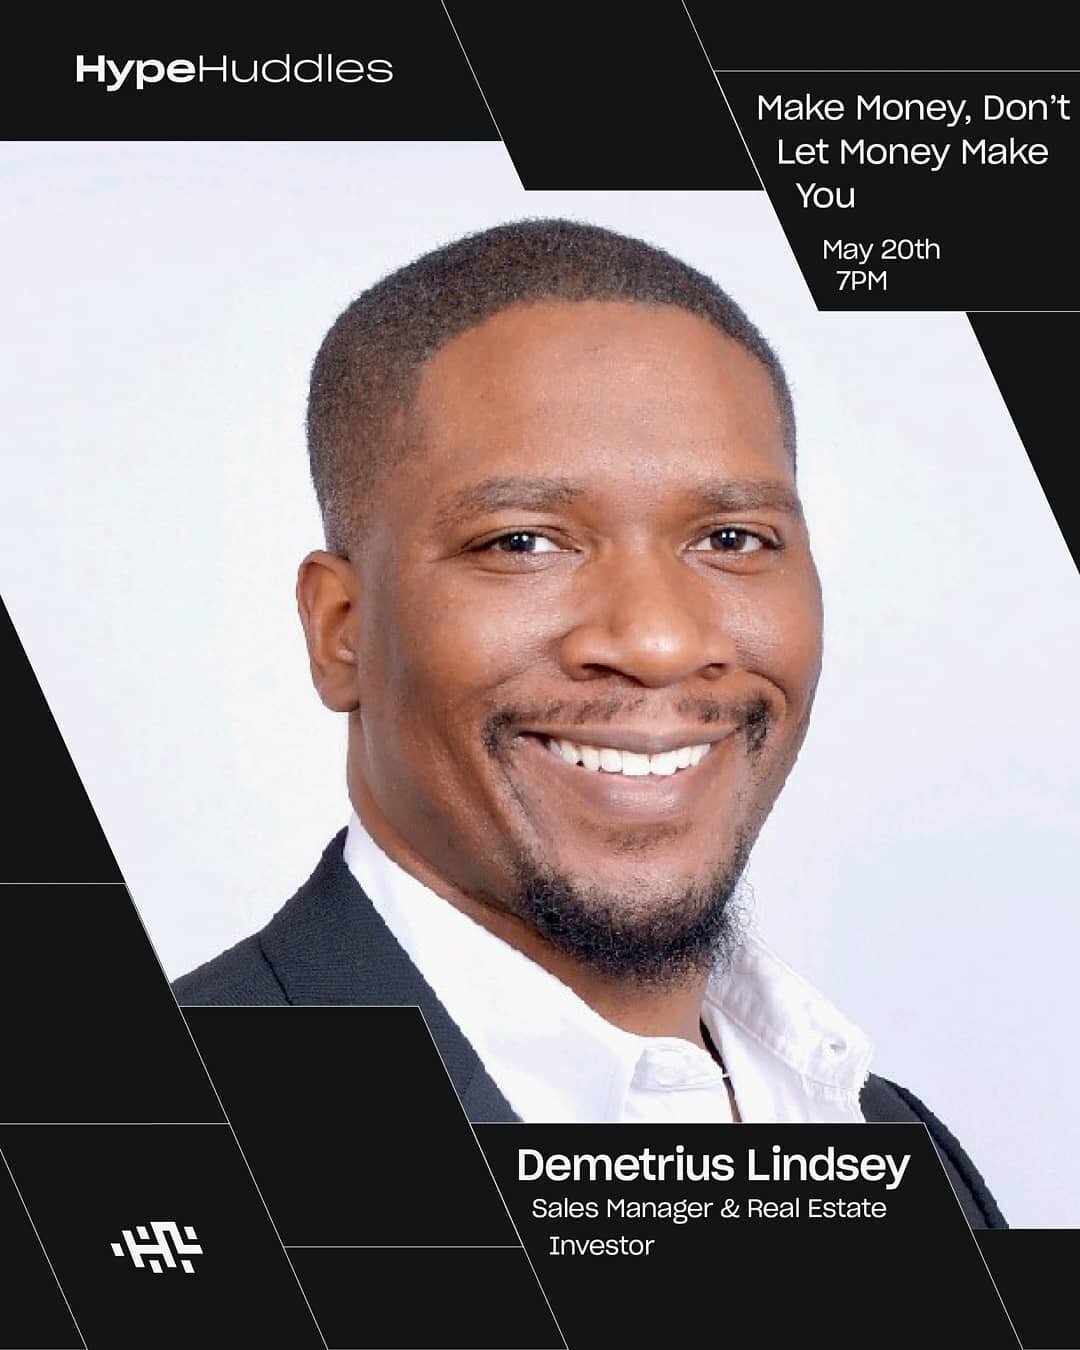 This Thursday's HypeHuddle will introduce Demetrius Lindsey, a master-salesman and real estate investor who has been able to create an amazing work-life balance through the building of systems.&nbsp; After college, Demetrius explored several differen